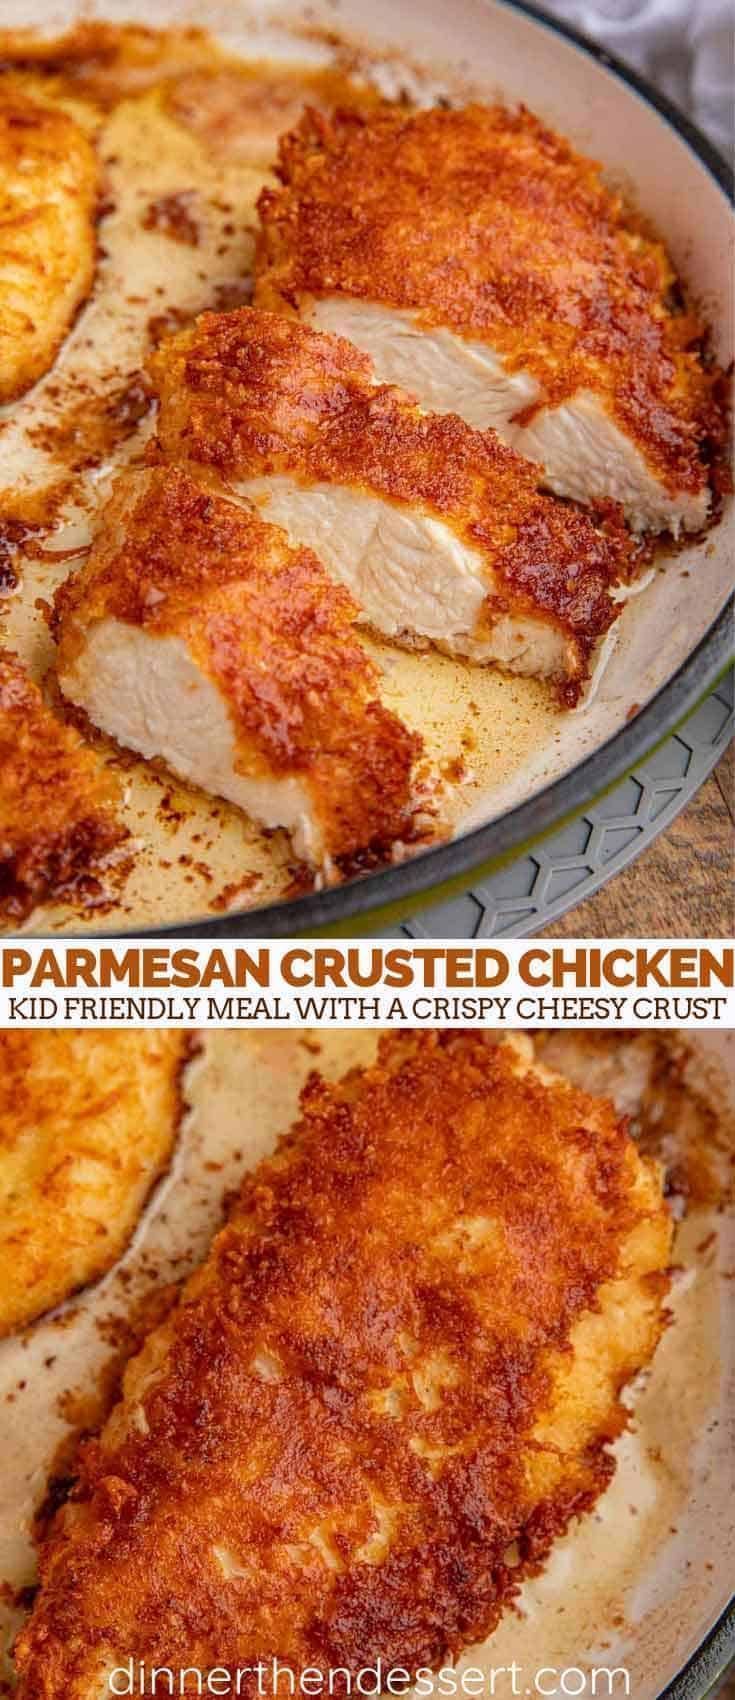 Ultimate Parmesan Crusted Chicken (5 mins prep!) - Dinner, then Dessert -   19 dinner recipes for family chicken ideas